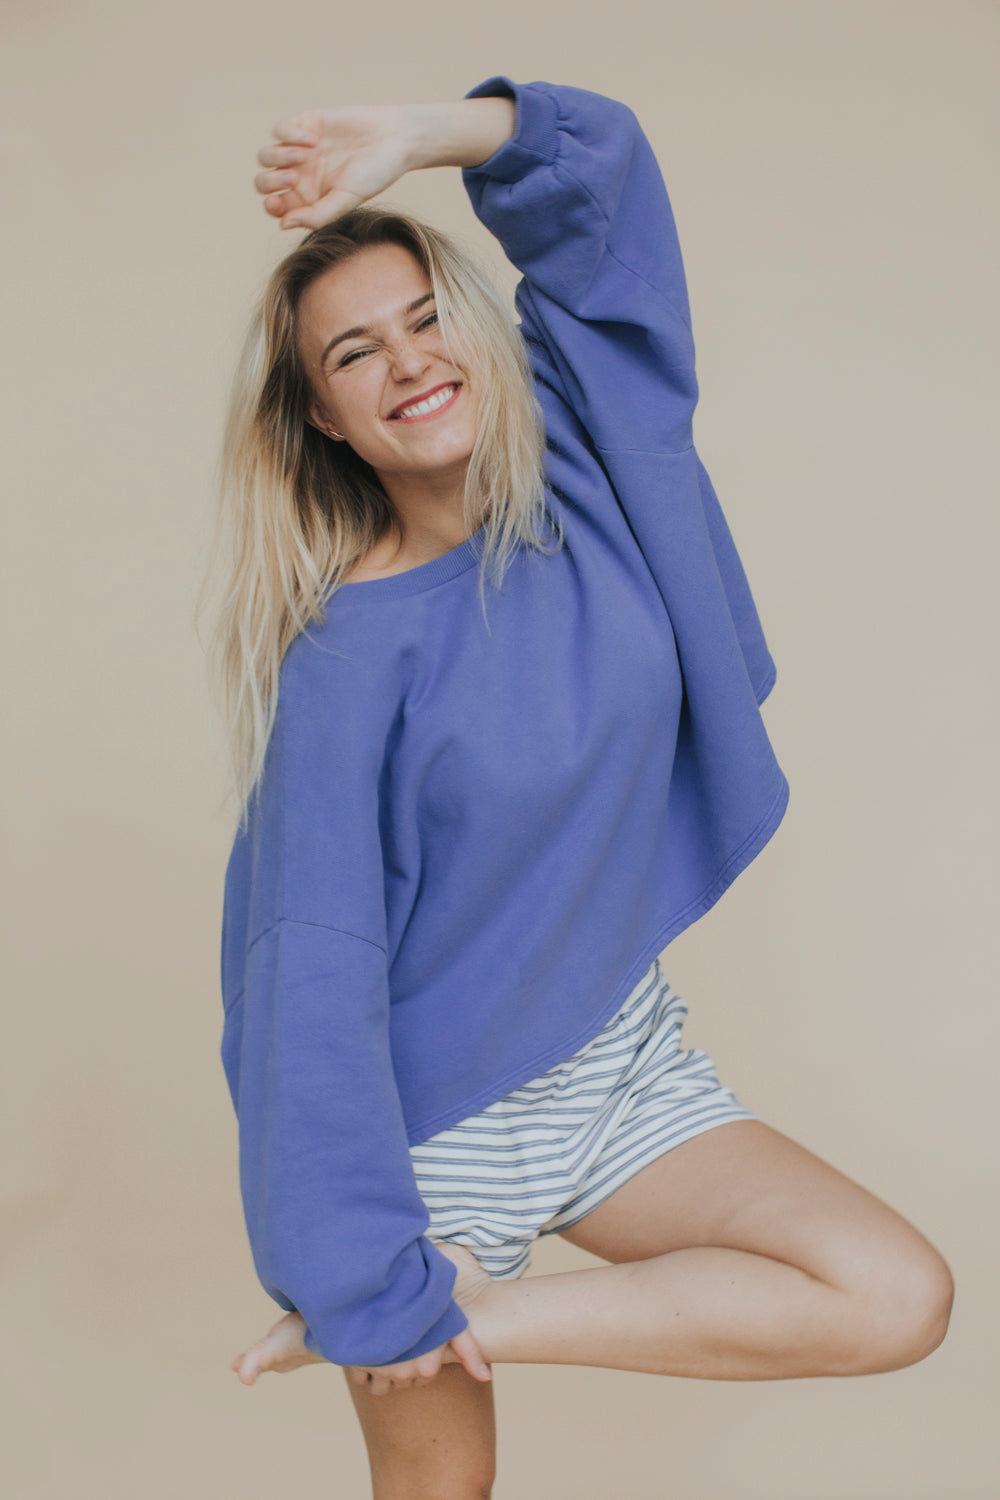 the dão store - Sweater Bree - Soft Cobalt - Sweaters | Hoodies